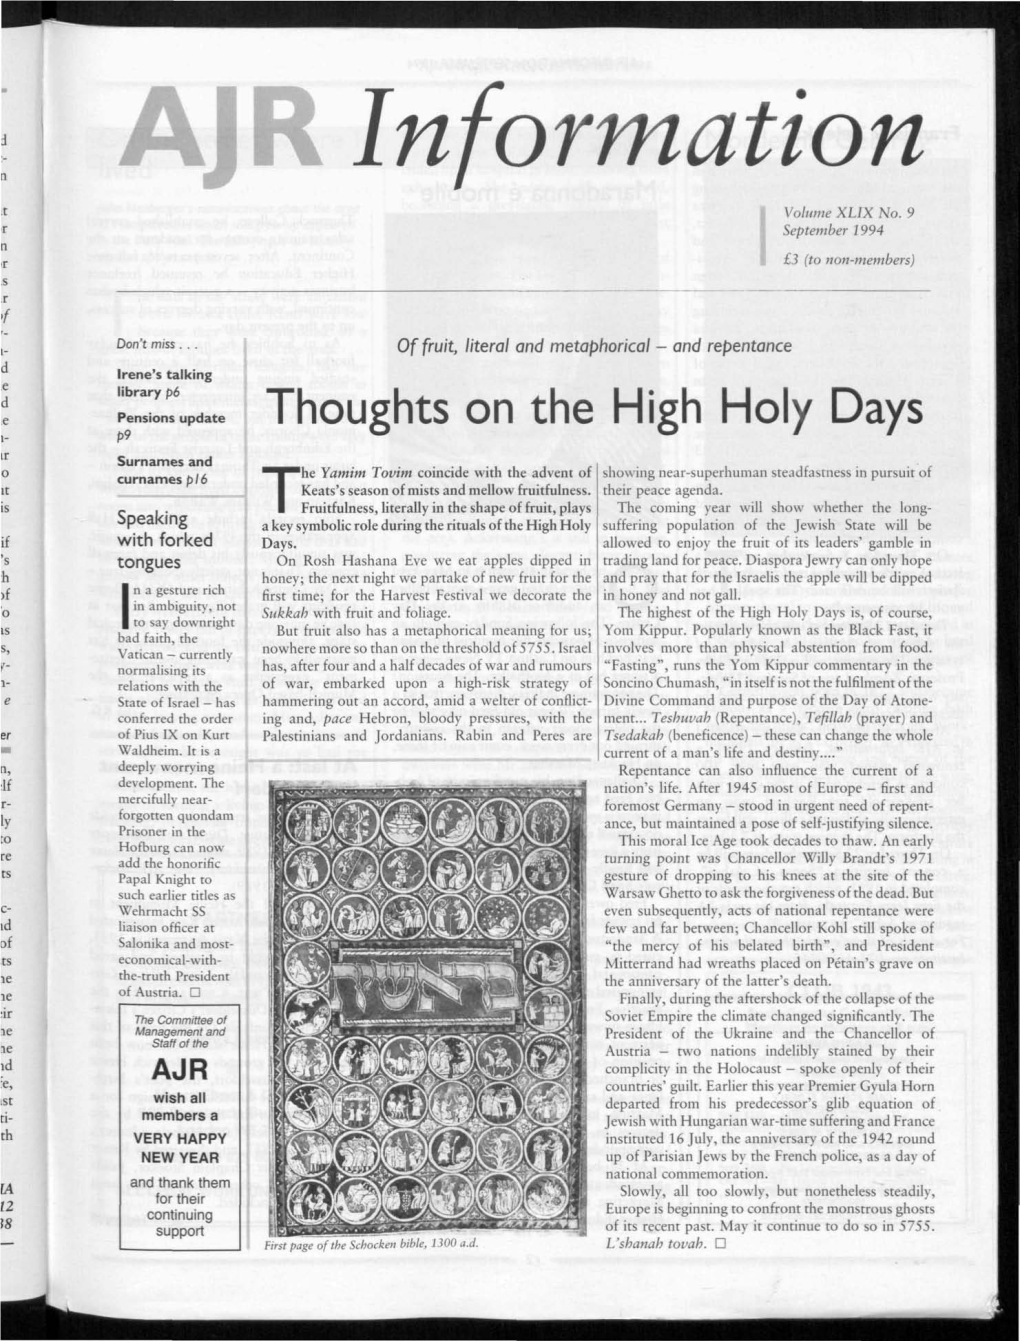 Thoughts on the High Holy Days P9